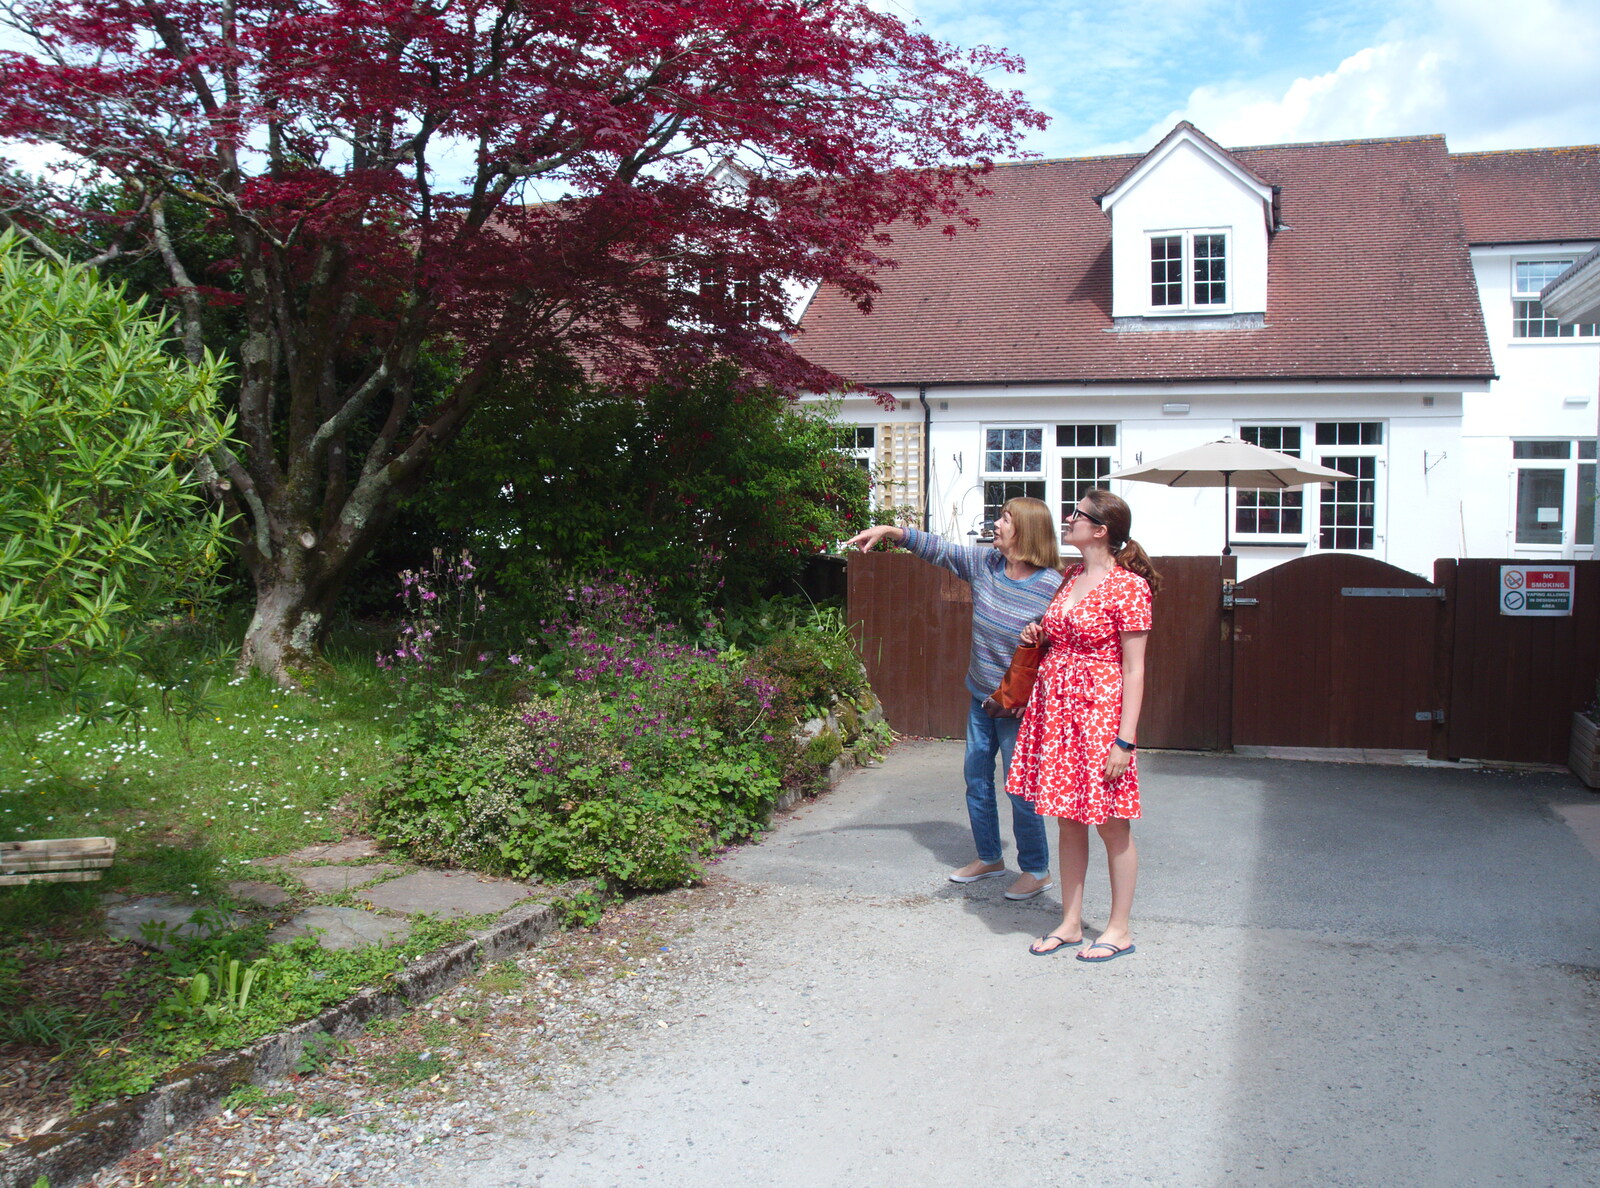 Mother shows off the gardens from Chagford Lido and a Trip to Parke, Bovey Tracey, Devon - 25th May 2019